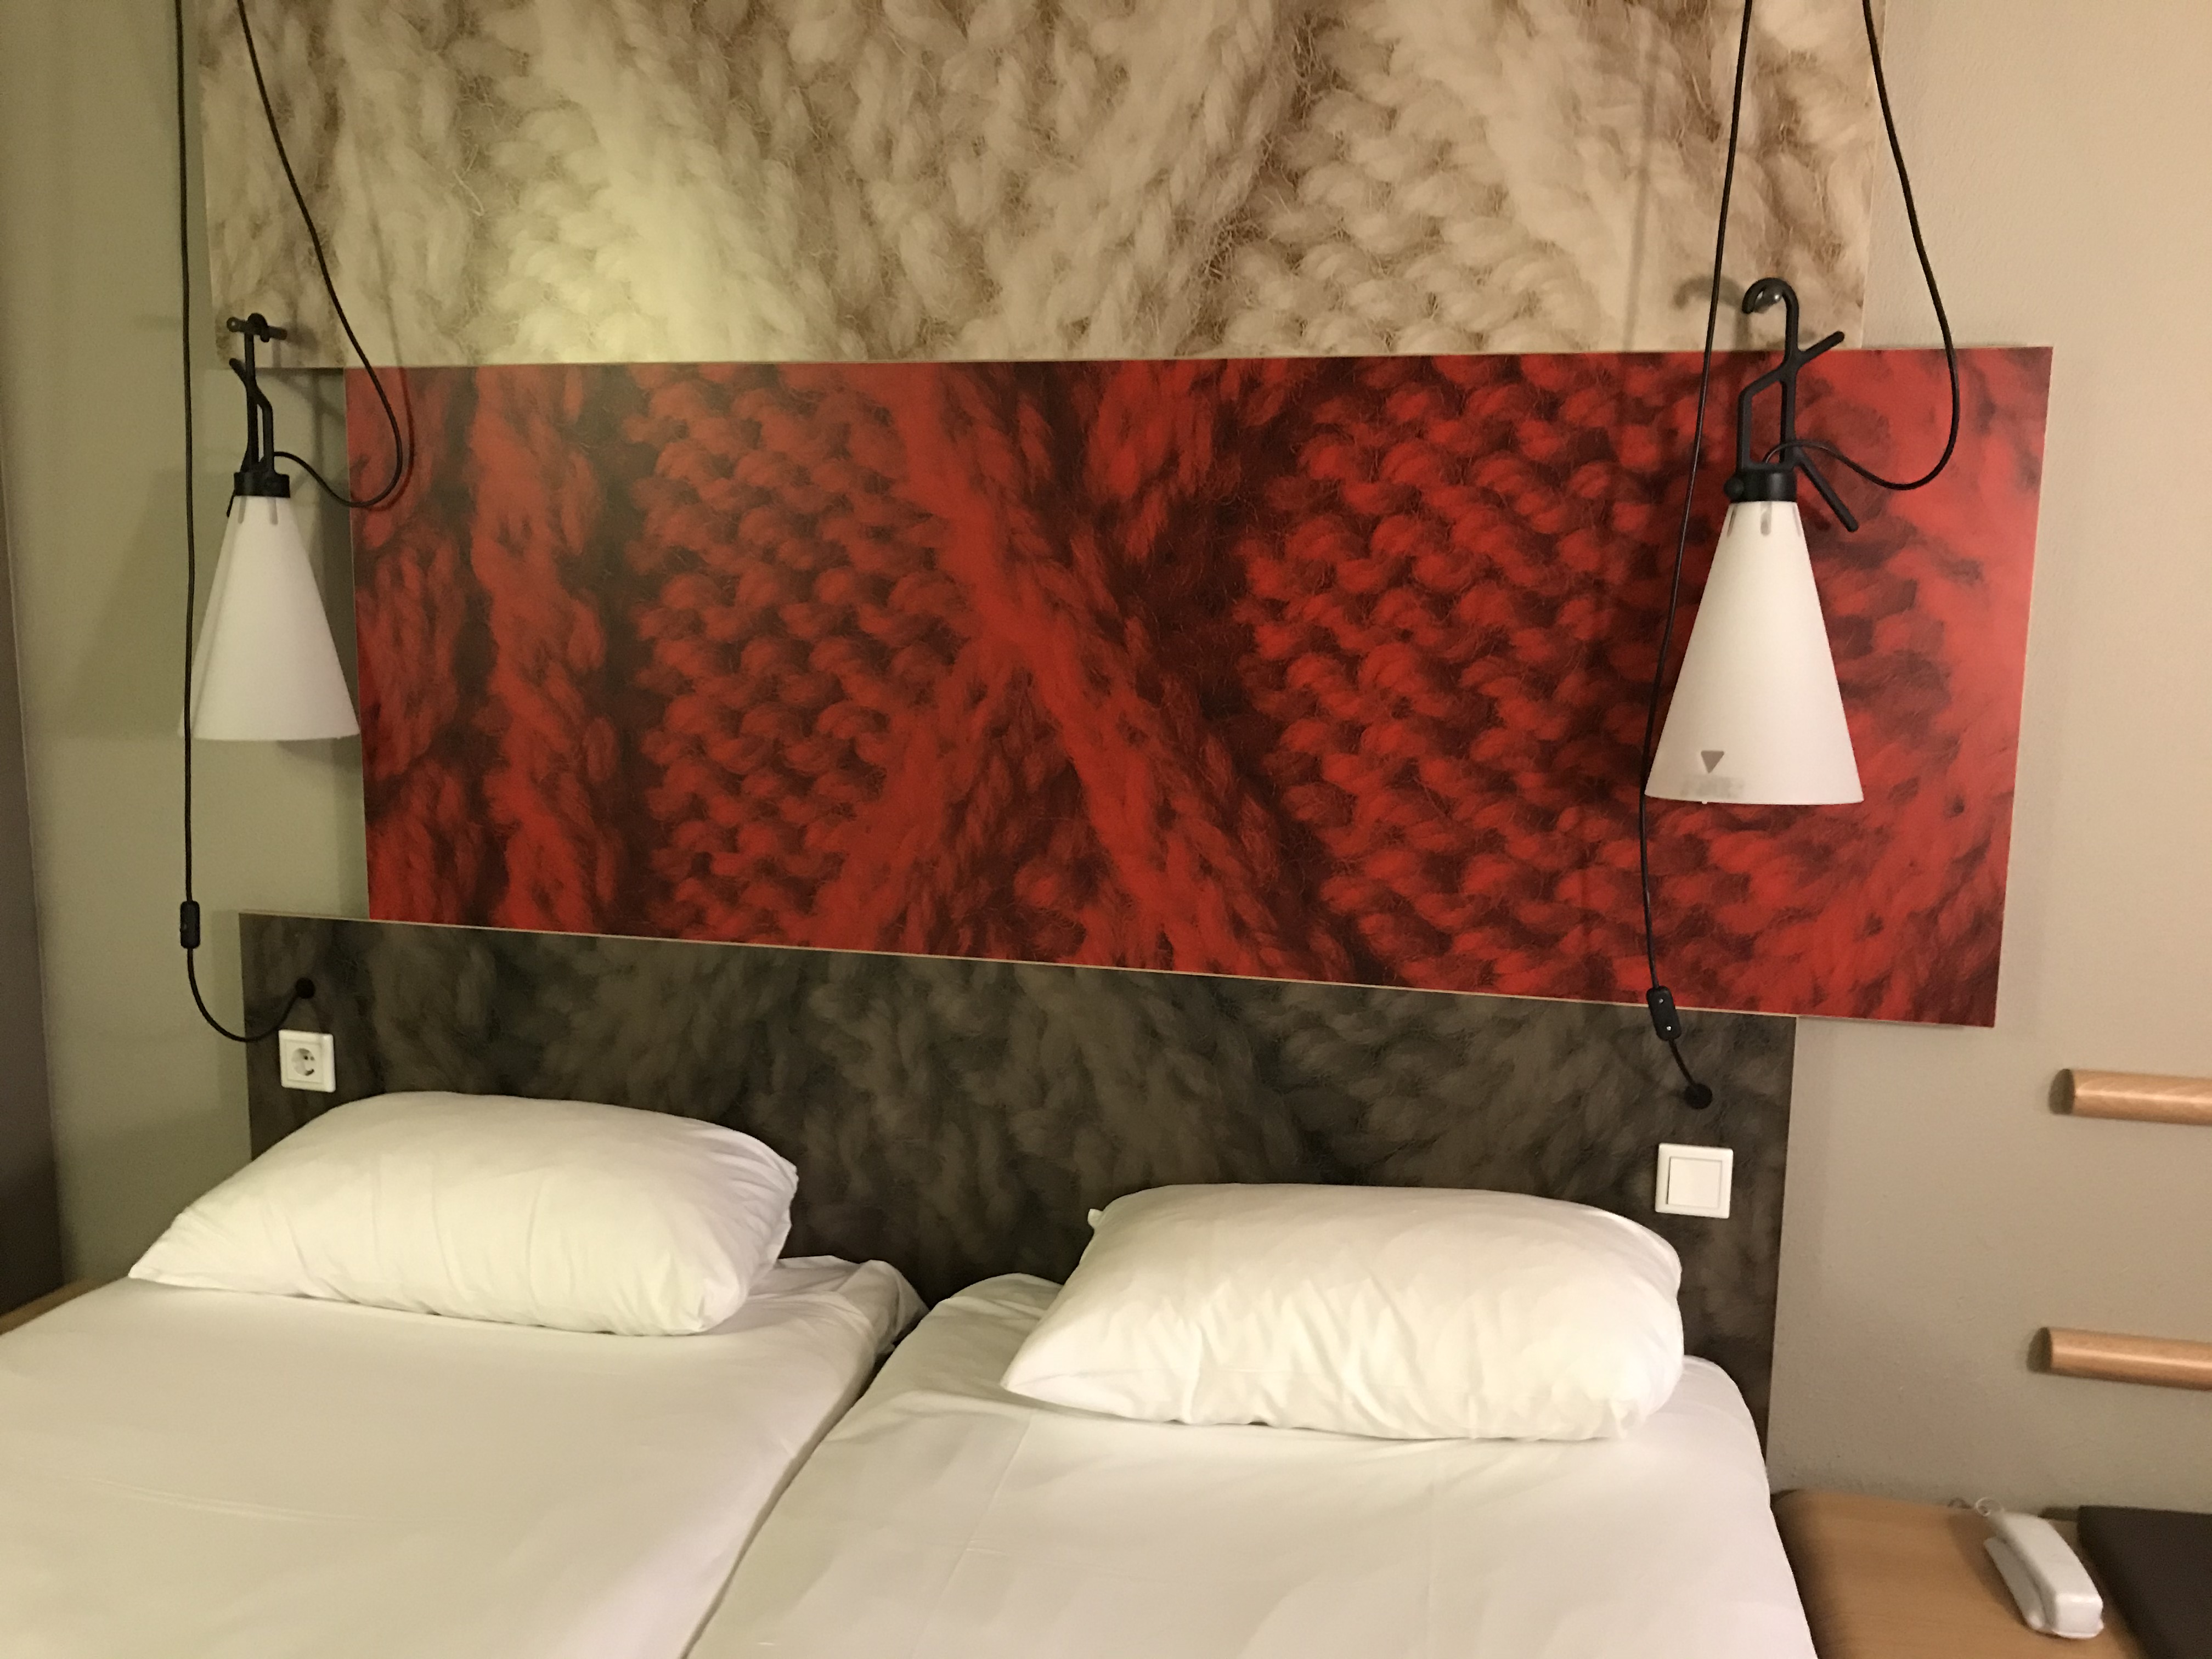 a bed with white sheets and lamps